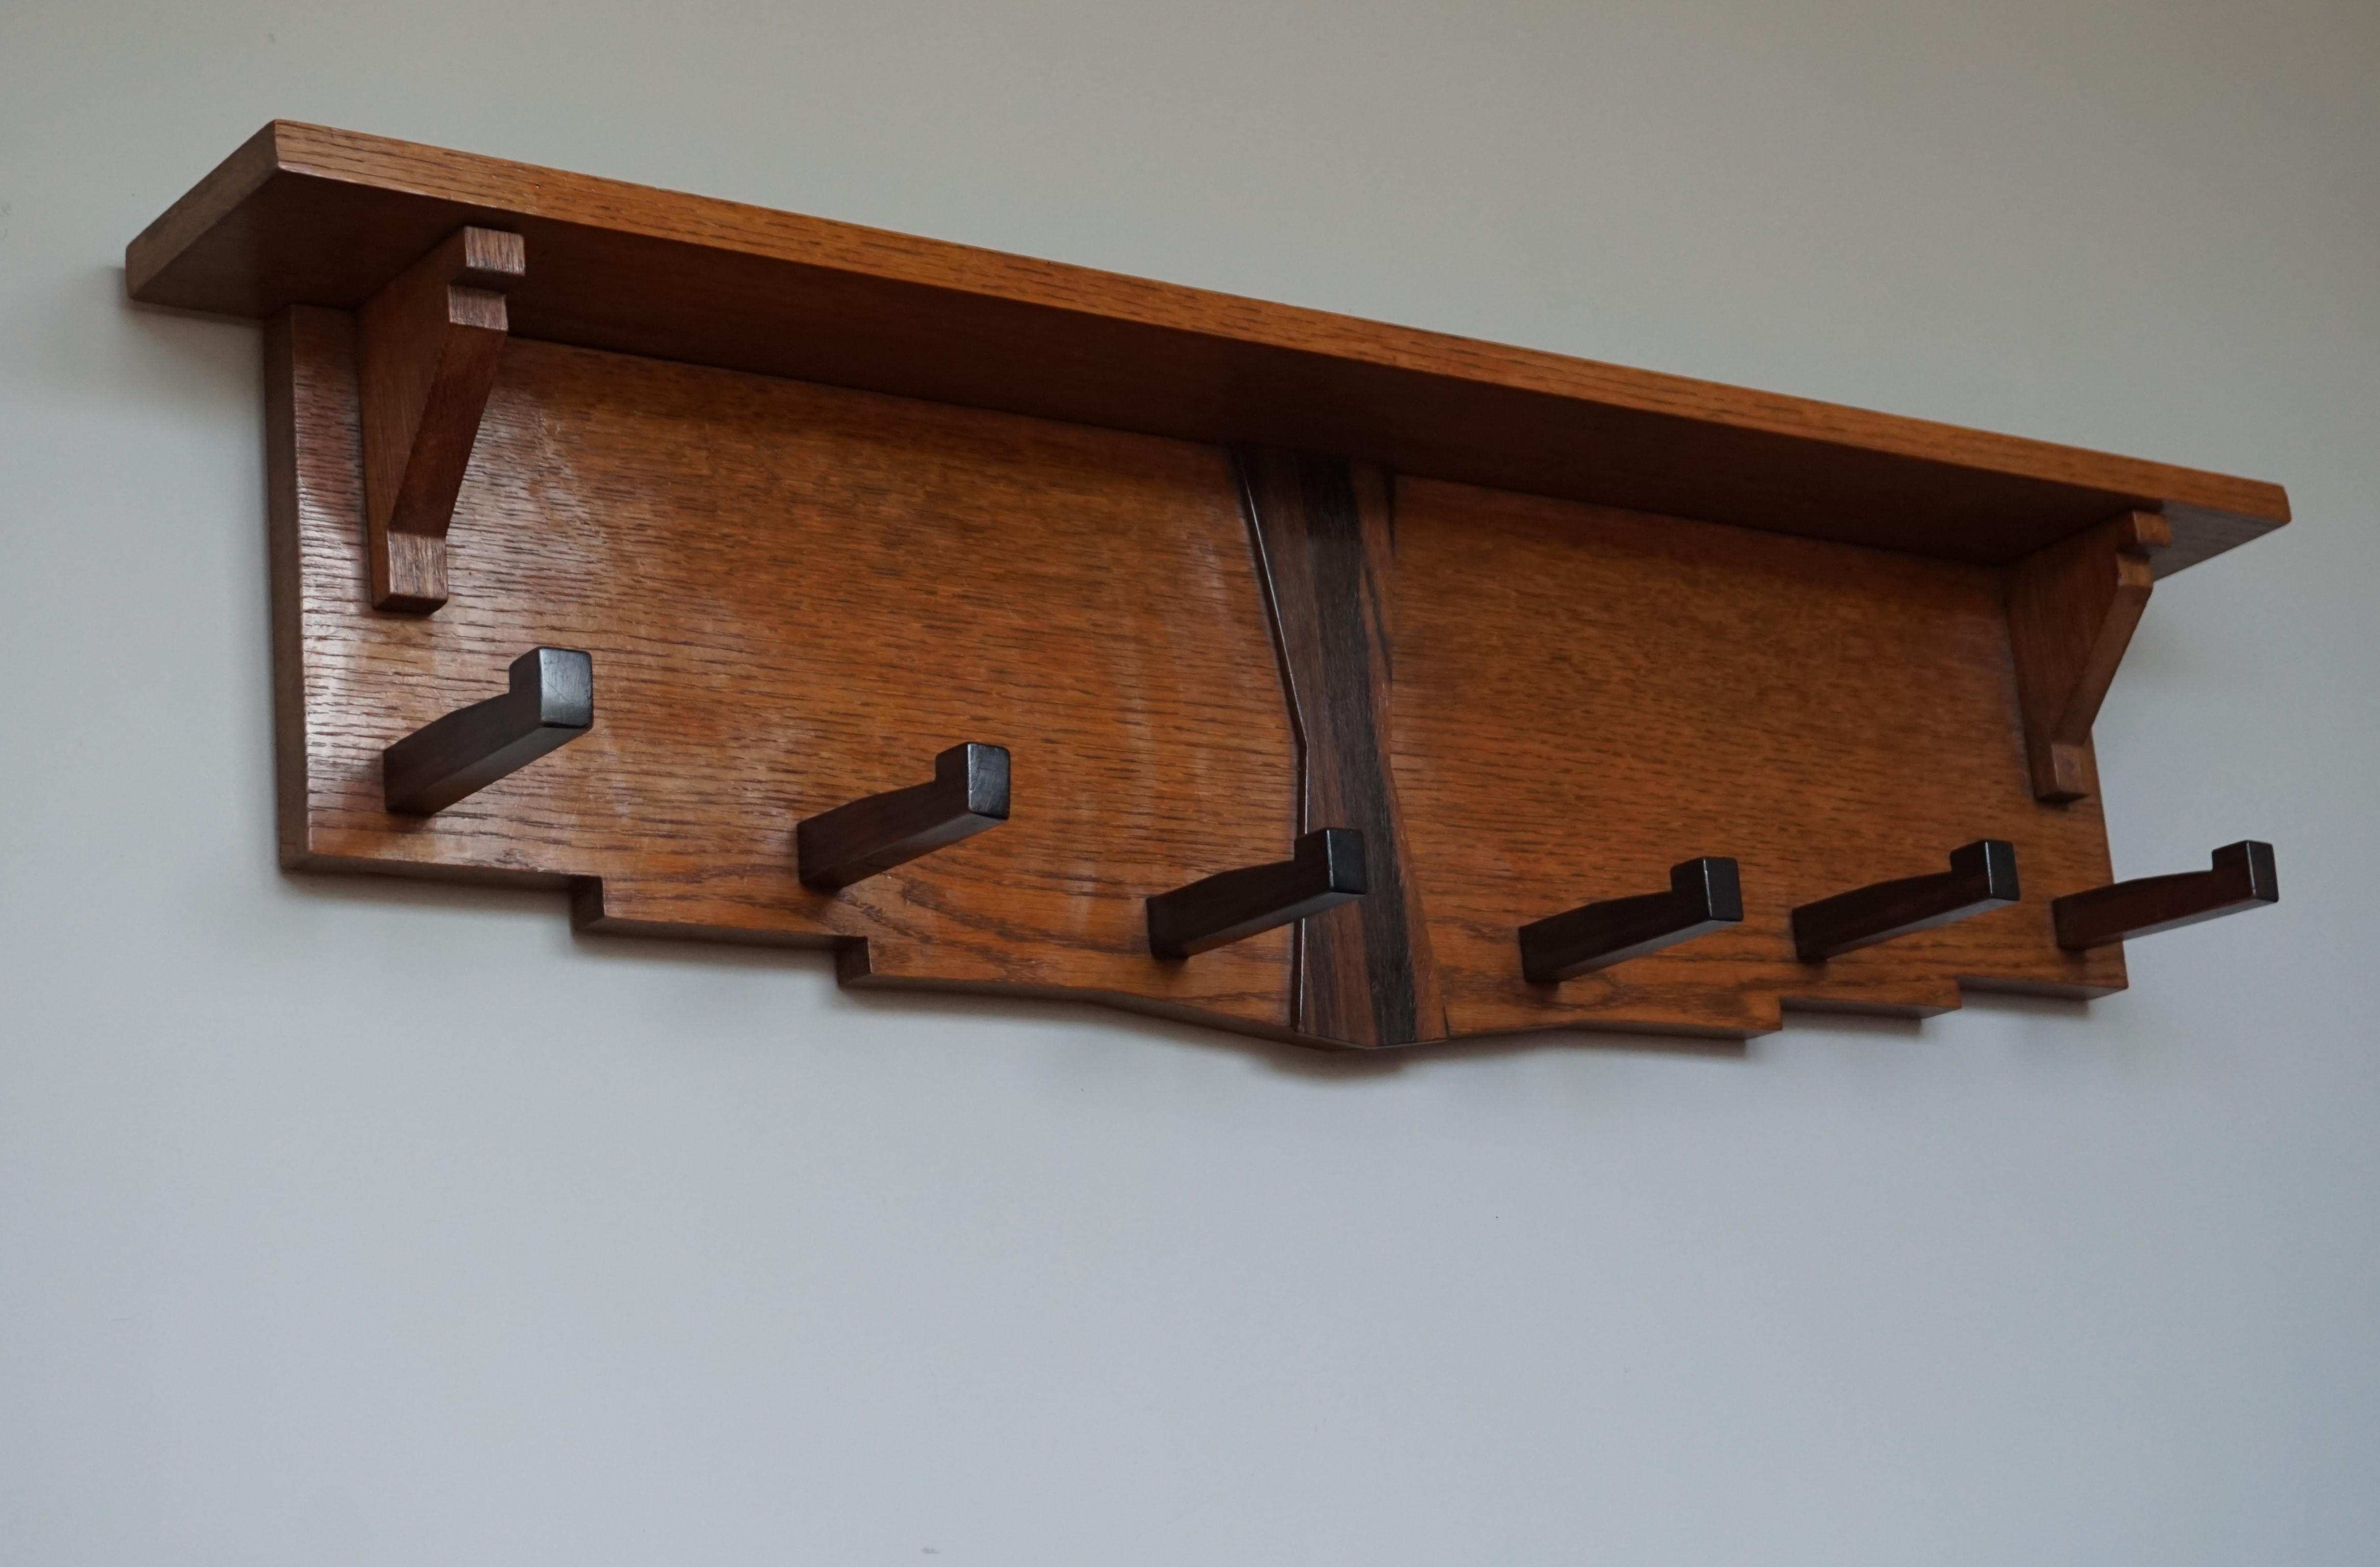 Beautiful design and warm colors, Art Deco coat rack.

This geometrical coat rack from the Dutch Art Deco era could very well appeal to Art Deco collectors the world over. This entry hall statement piece is made of a stunning and light colored oak